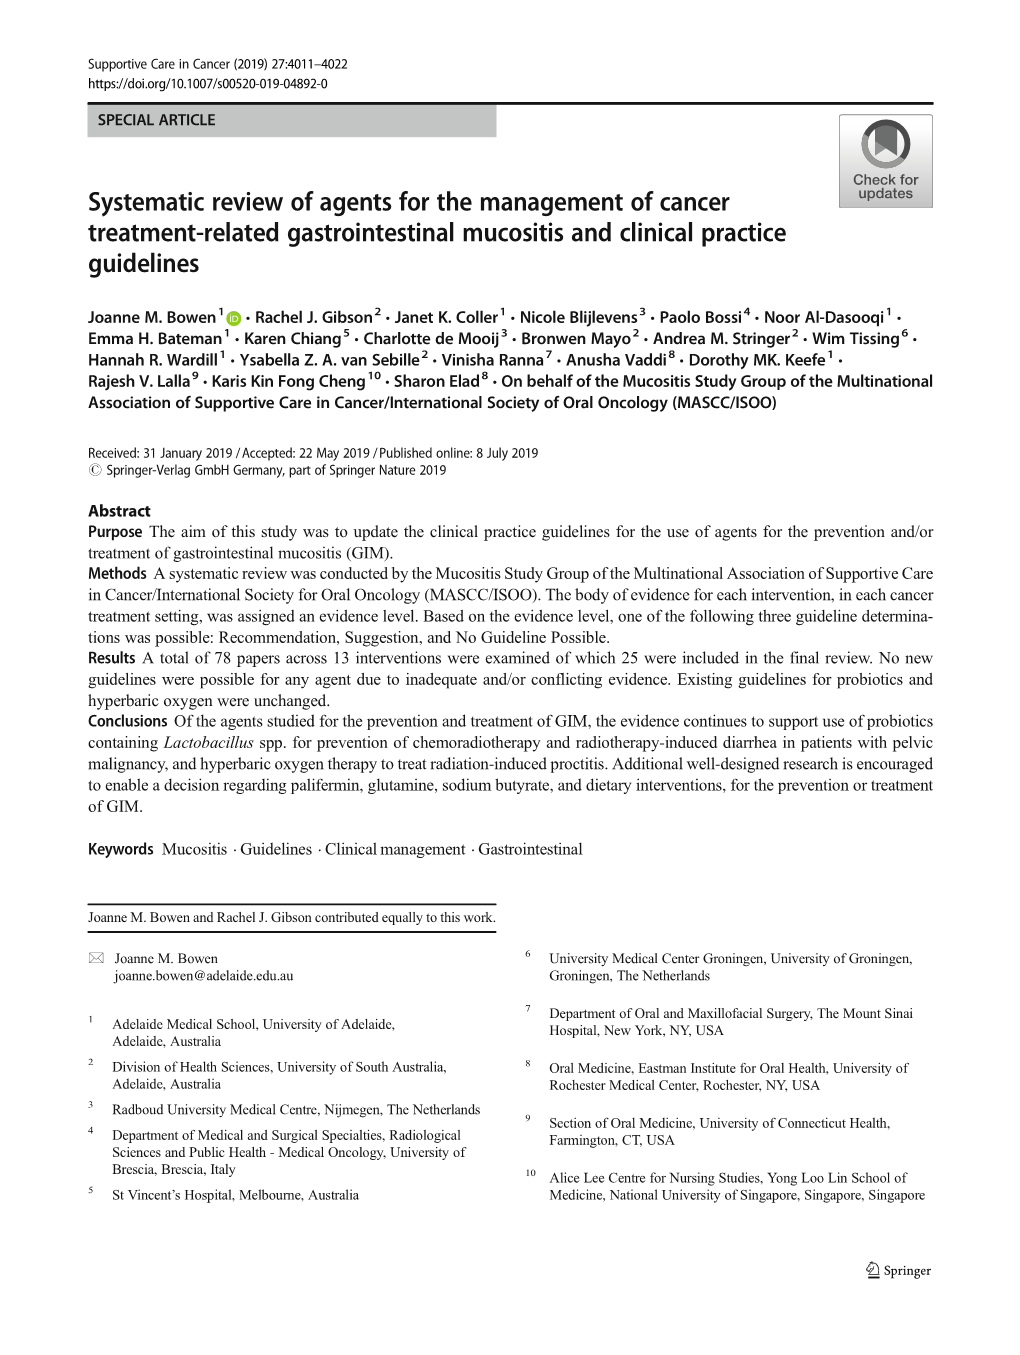 Systematic Review of Agents for the Management of Cancer Treatment-Related Gastrointestinal Mucositis and Clinical Practice Guidelines